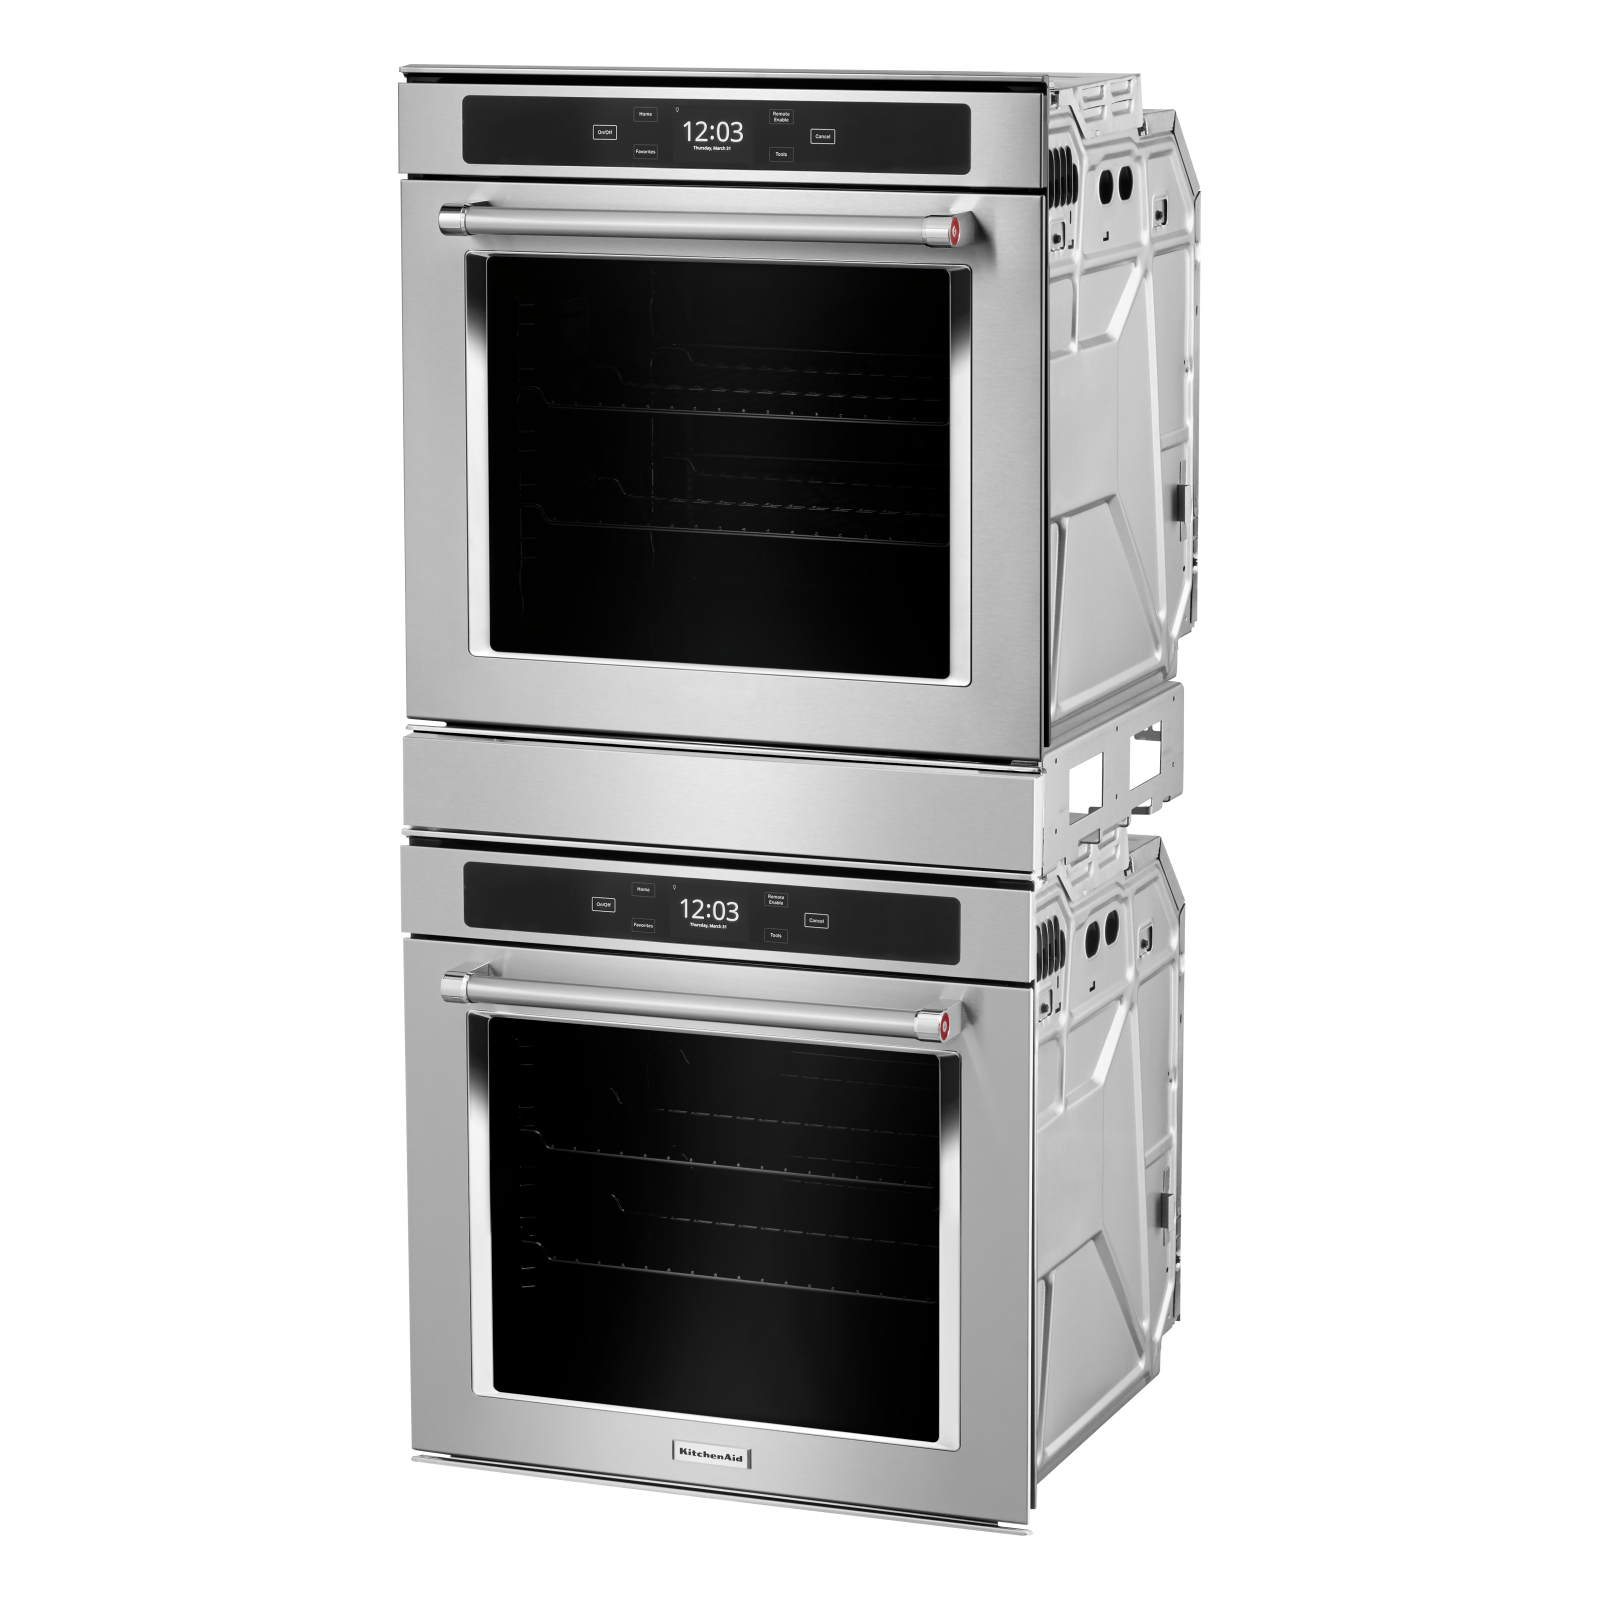 KitchenAid - 5.8 cu. ft Double Wall Oven in Stainless - KODC504PPS